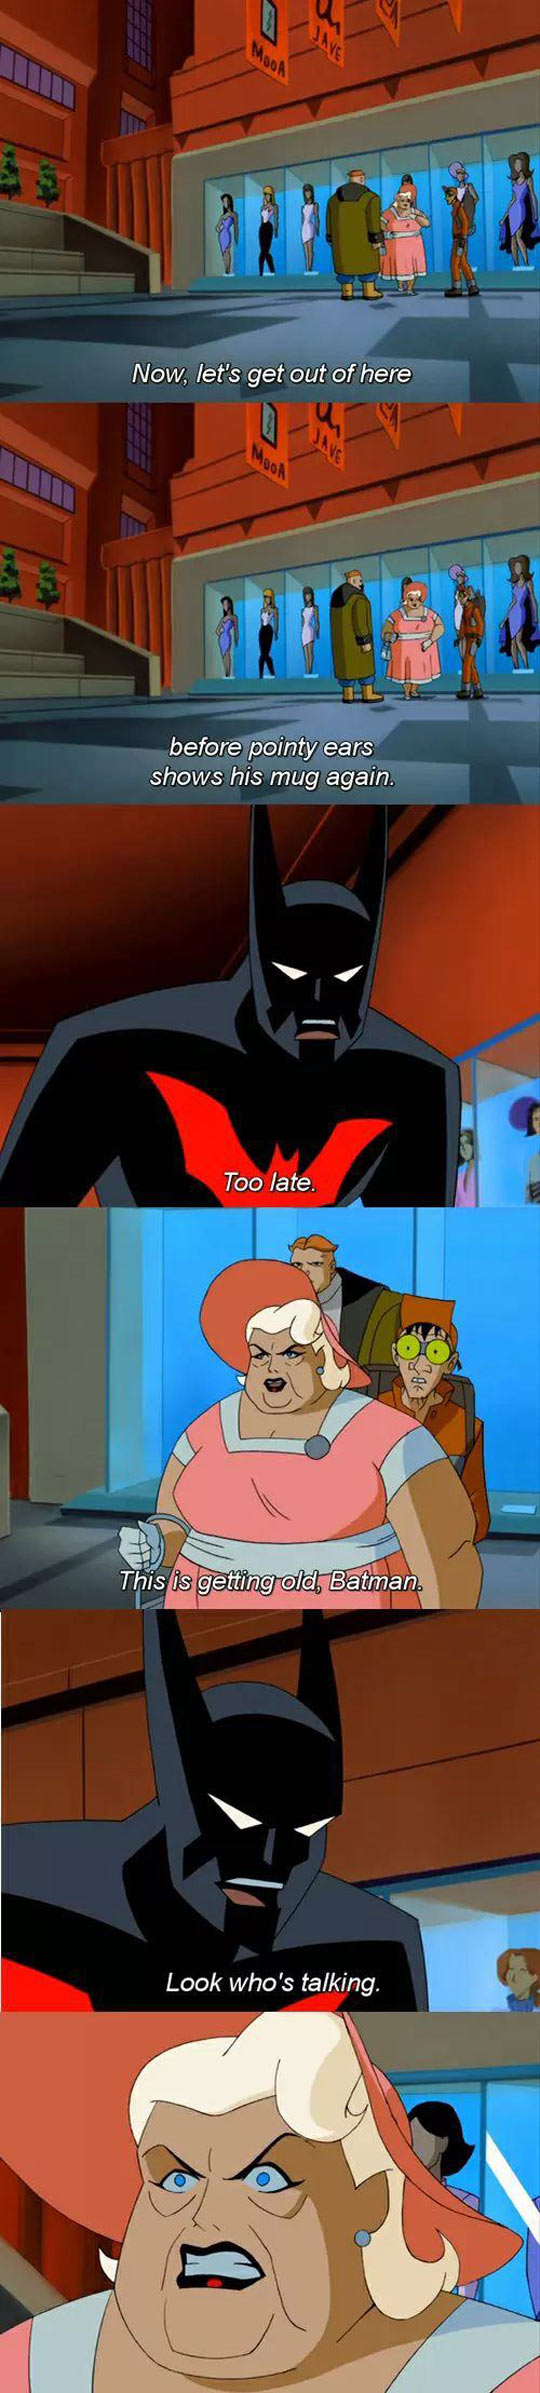 funny-picture-Batman-Beyond-old-thieves-woman